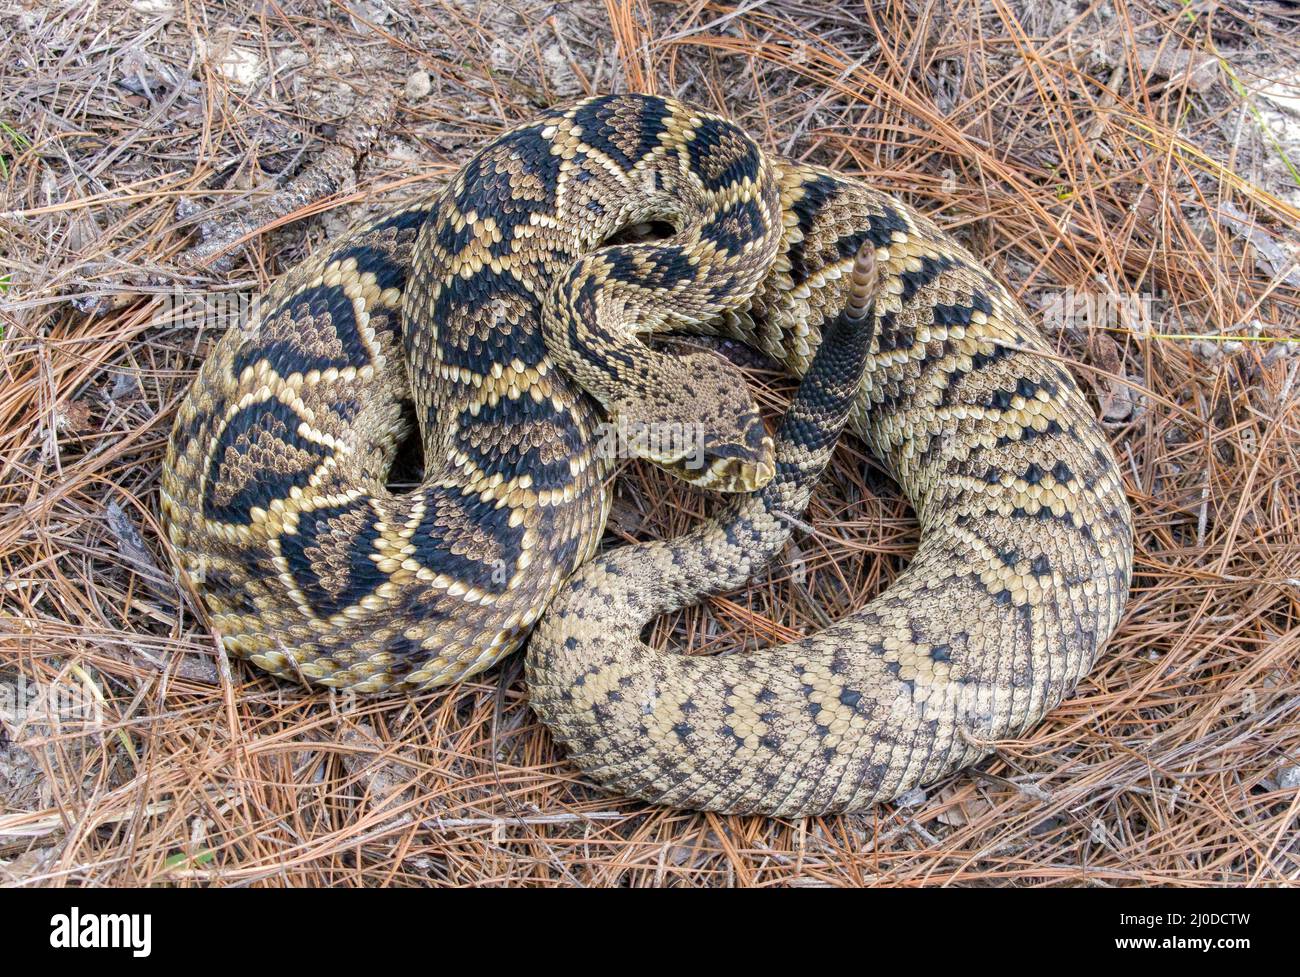 Large wild Eastern Diamondback rattlesnake - crotalus adamanteus laying in pine needles in north Florida.  View from above showing great detail of sca Stock Photo